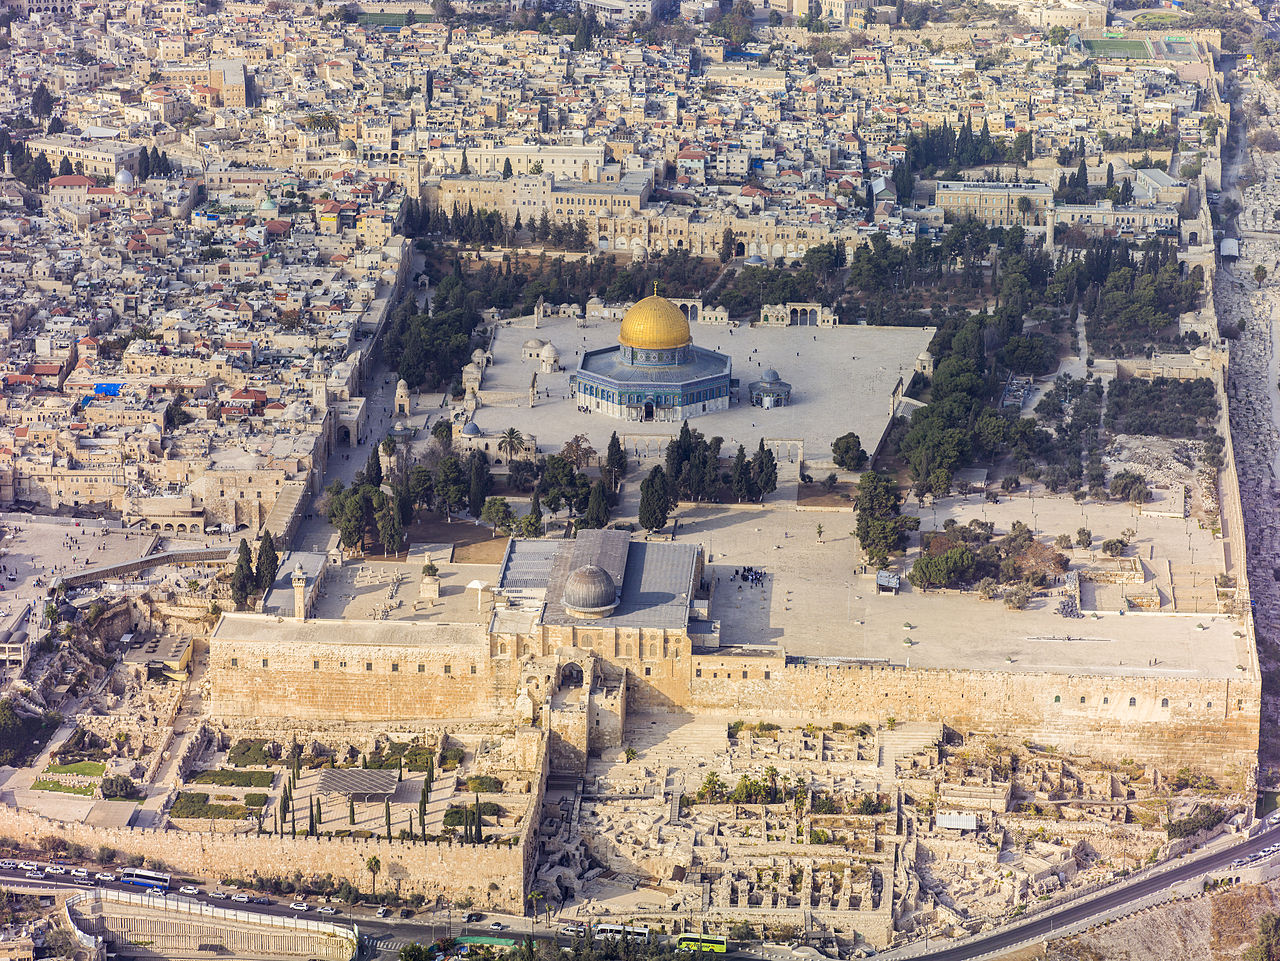 Southern Aerial View of the Temple Mount, Al-Aqsa Mosque in the Old City of Jerusalem